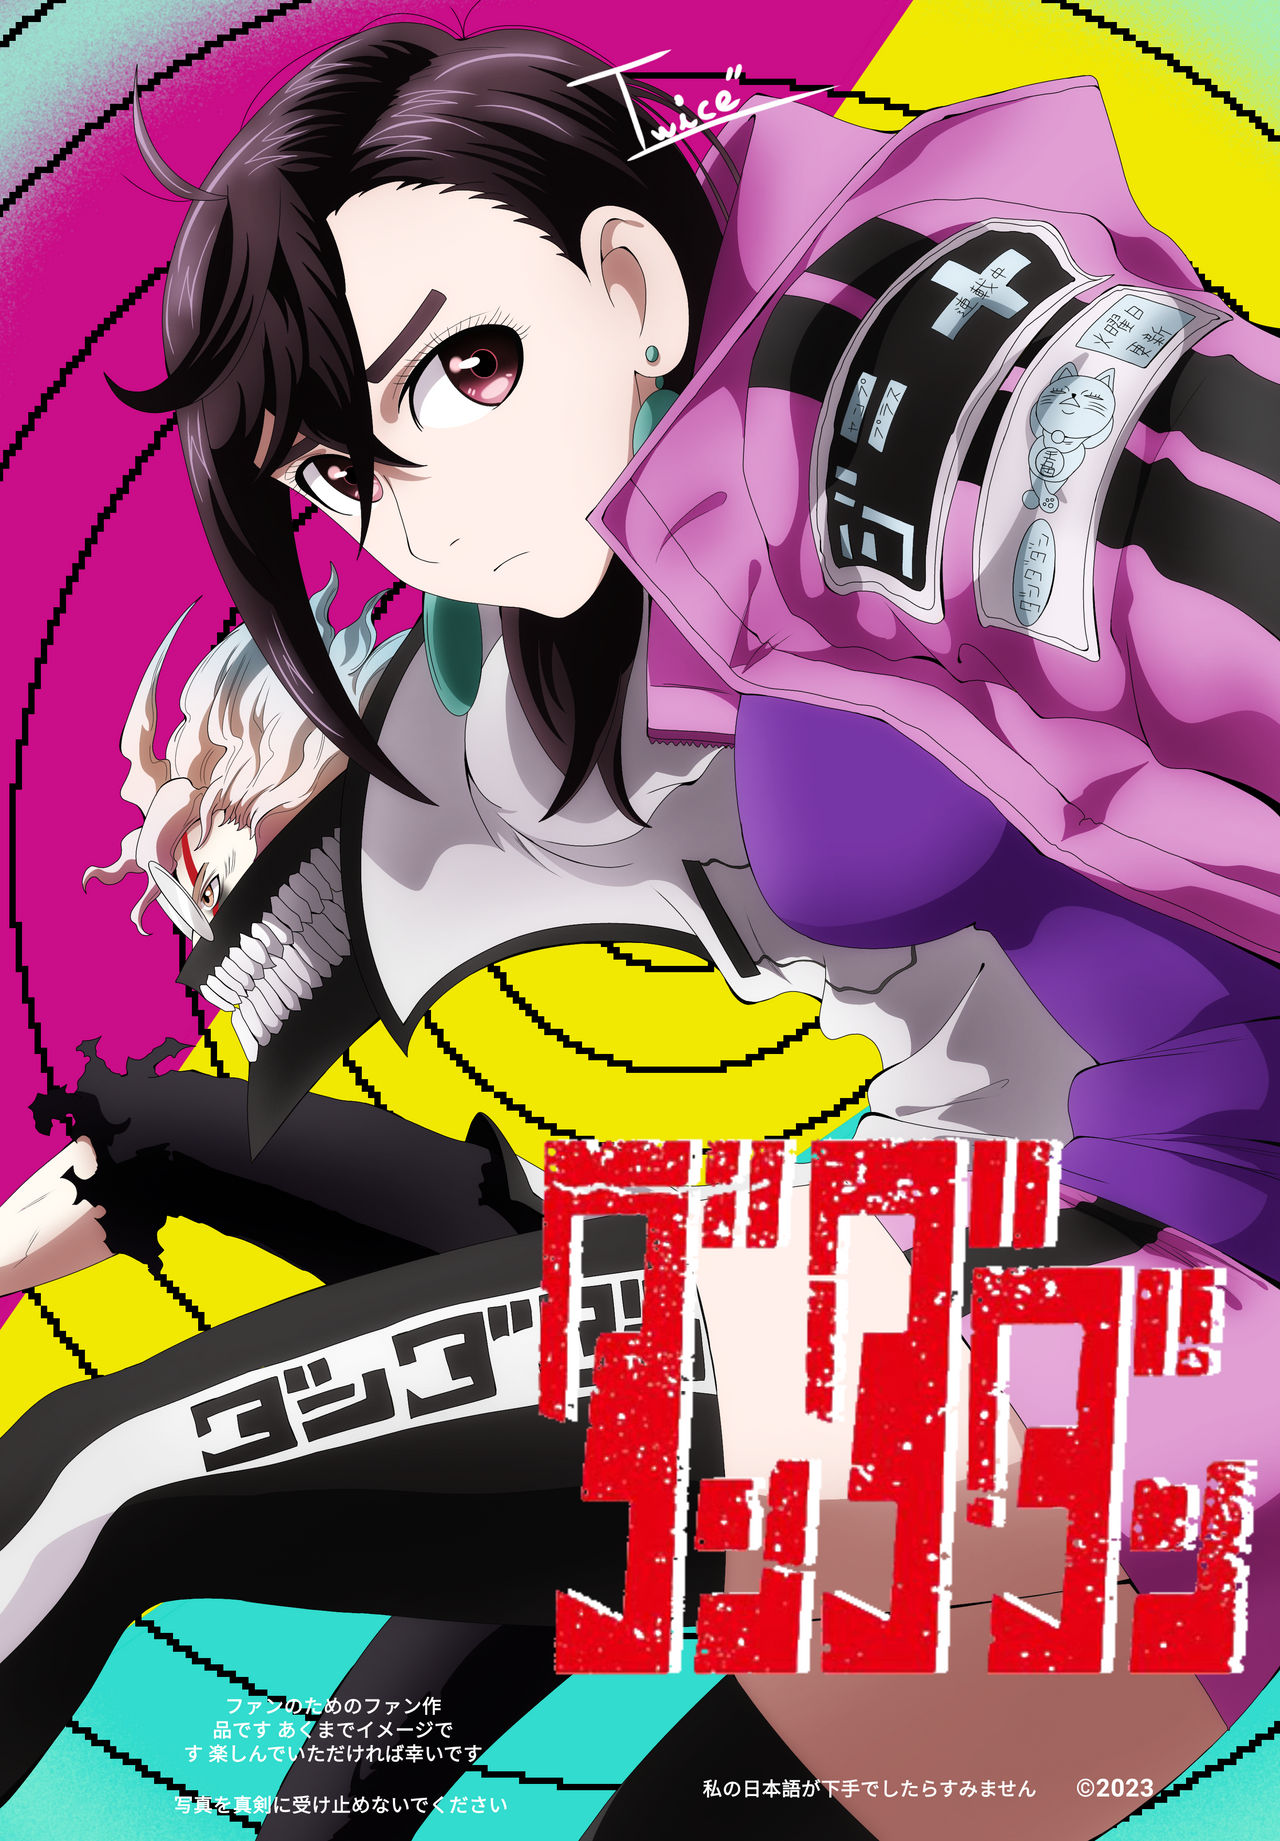 Power Chainsaw Man Anime Style by Twice7 on DeviantArt